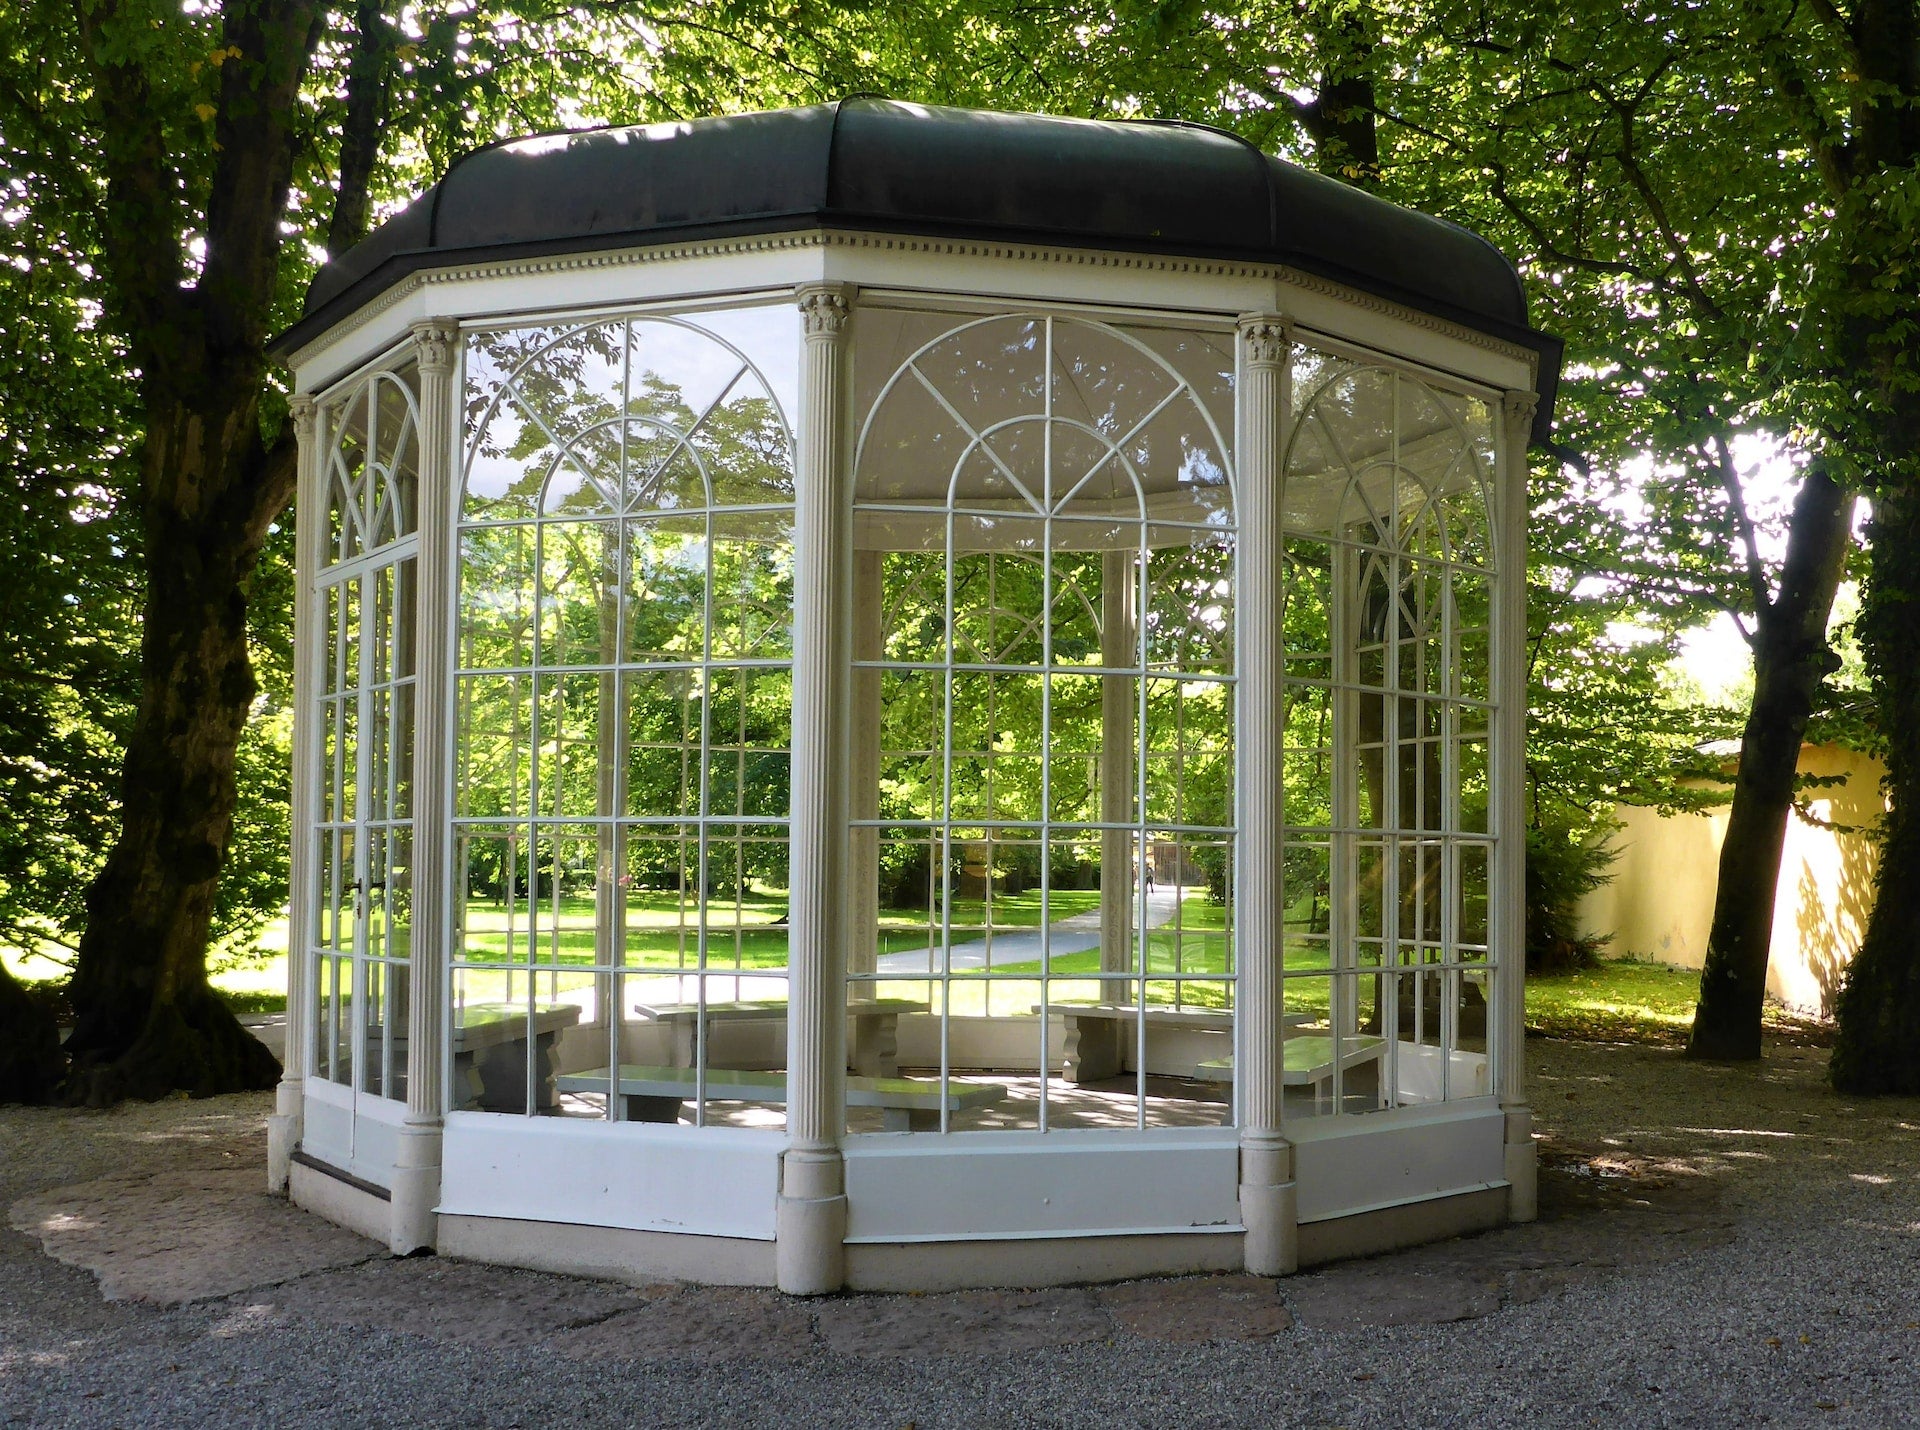 How Do I Keep My Gazebo From Blowing Away - 9 Tips to Follow Secure